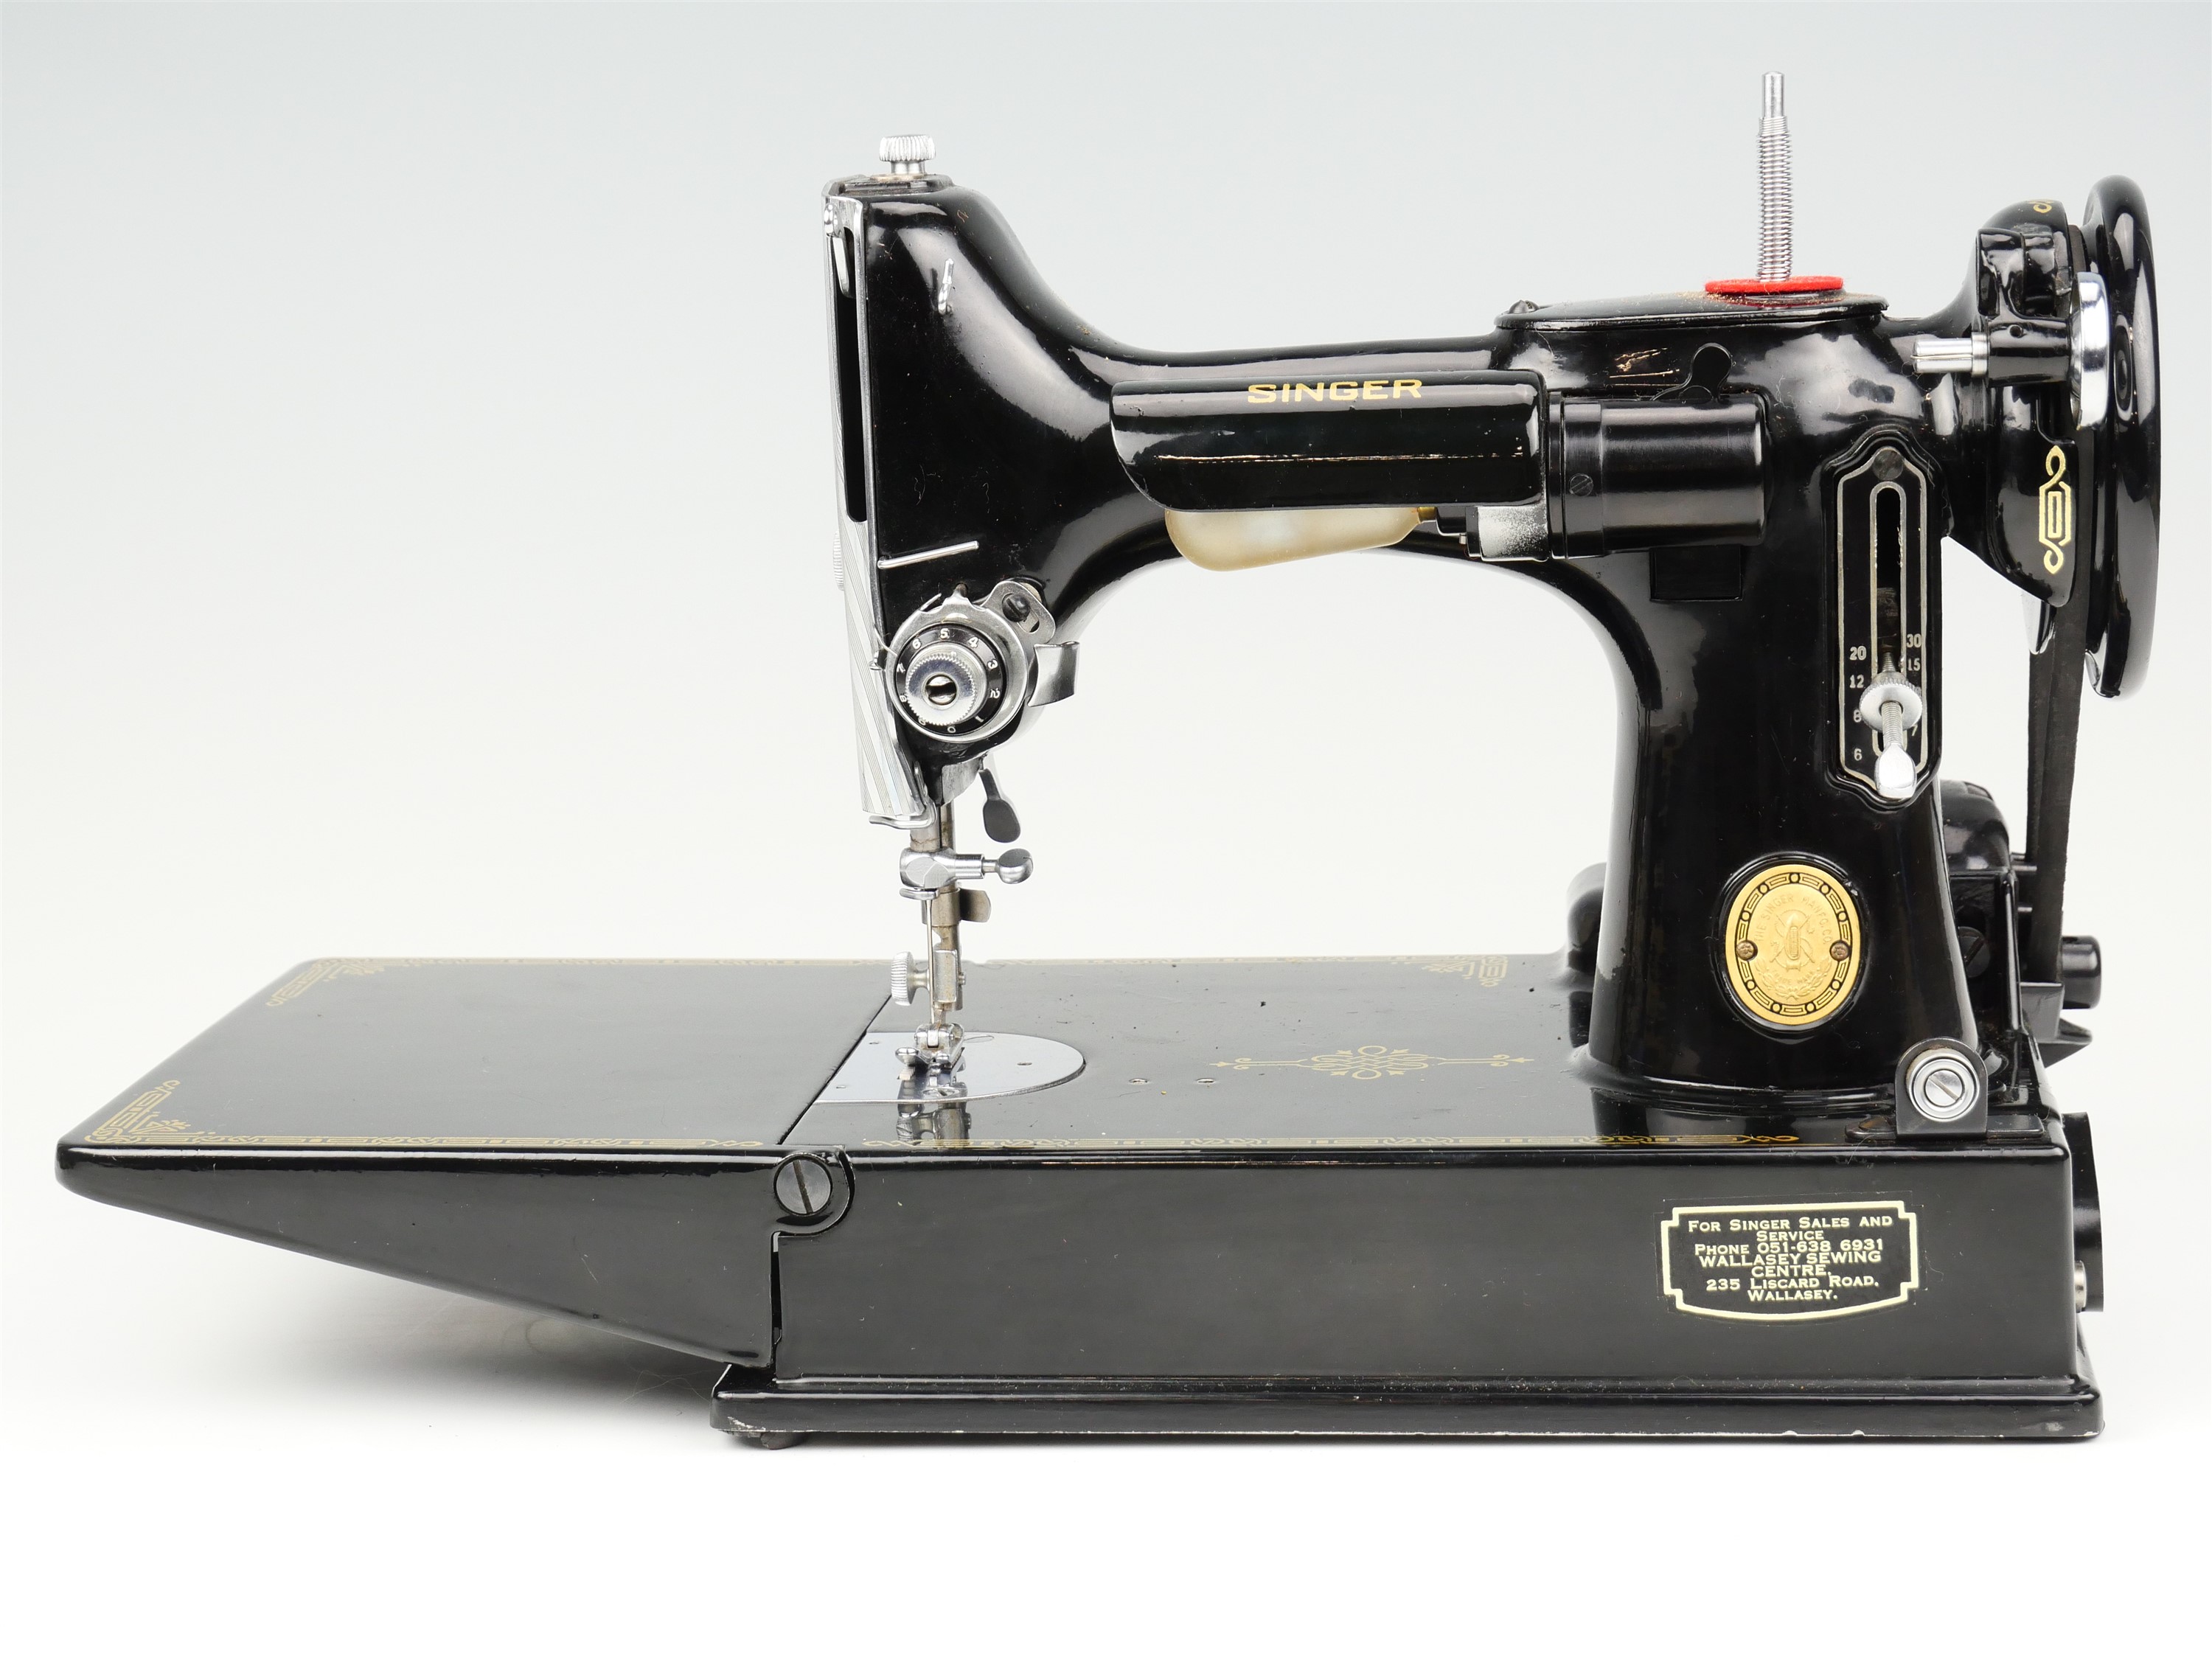 A mid 20th Century Singer Featherweight portable sewing machine, model number 221K, in carry case - Image 2 of 4